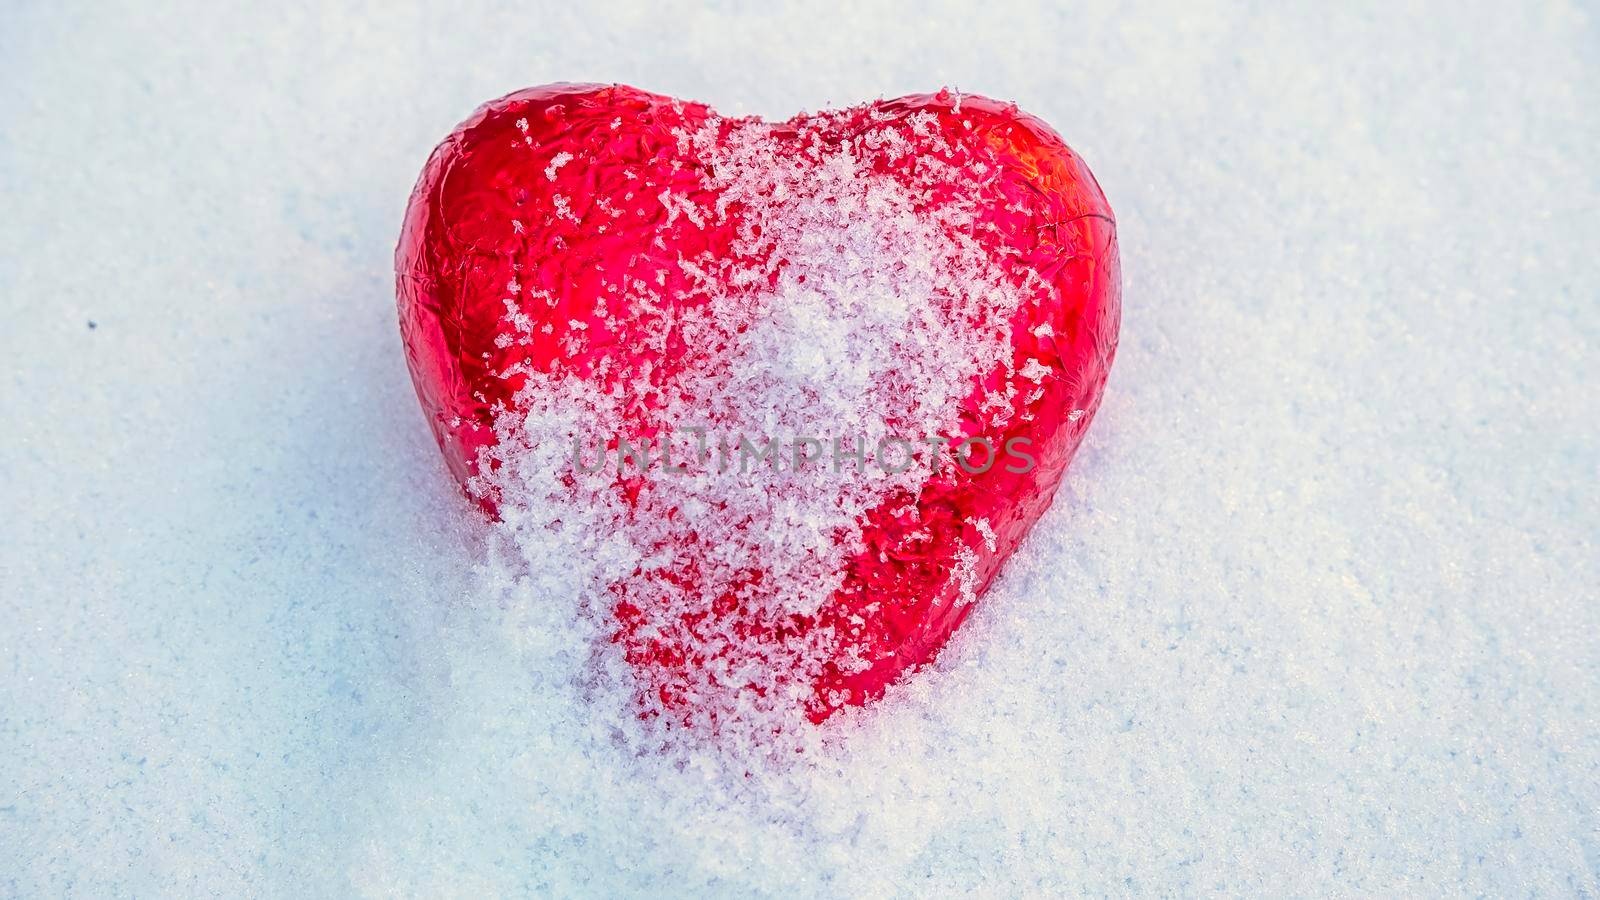 Red Valentine's heart in the snow by devy